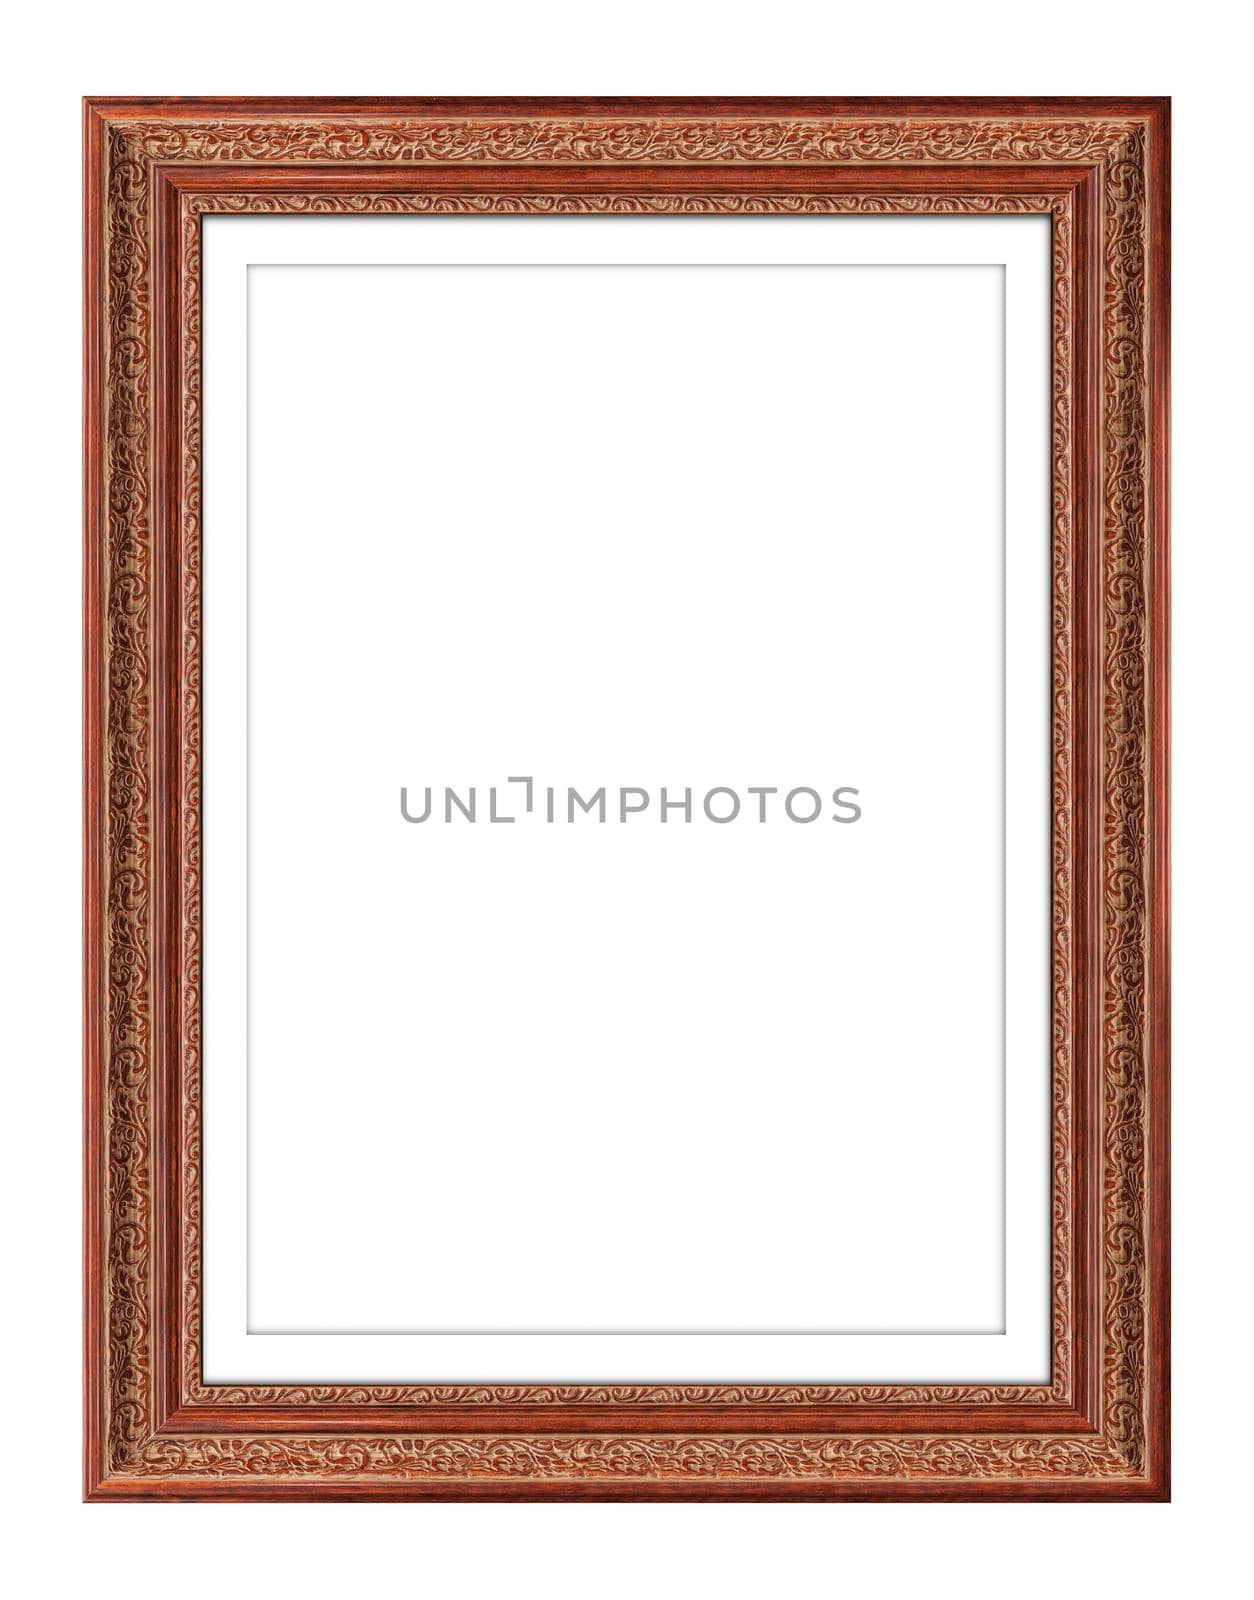 wooden frame for picture or photo by SlayCer